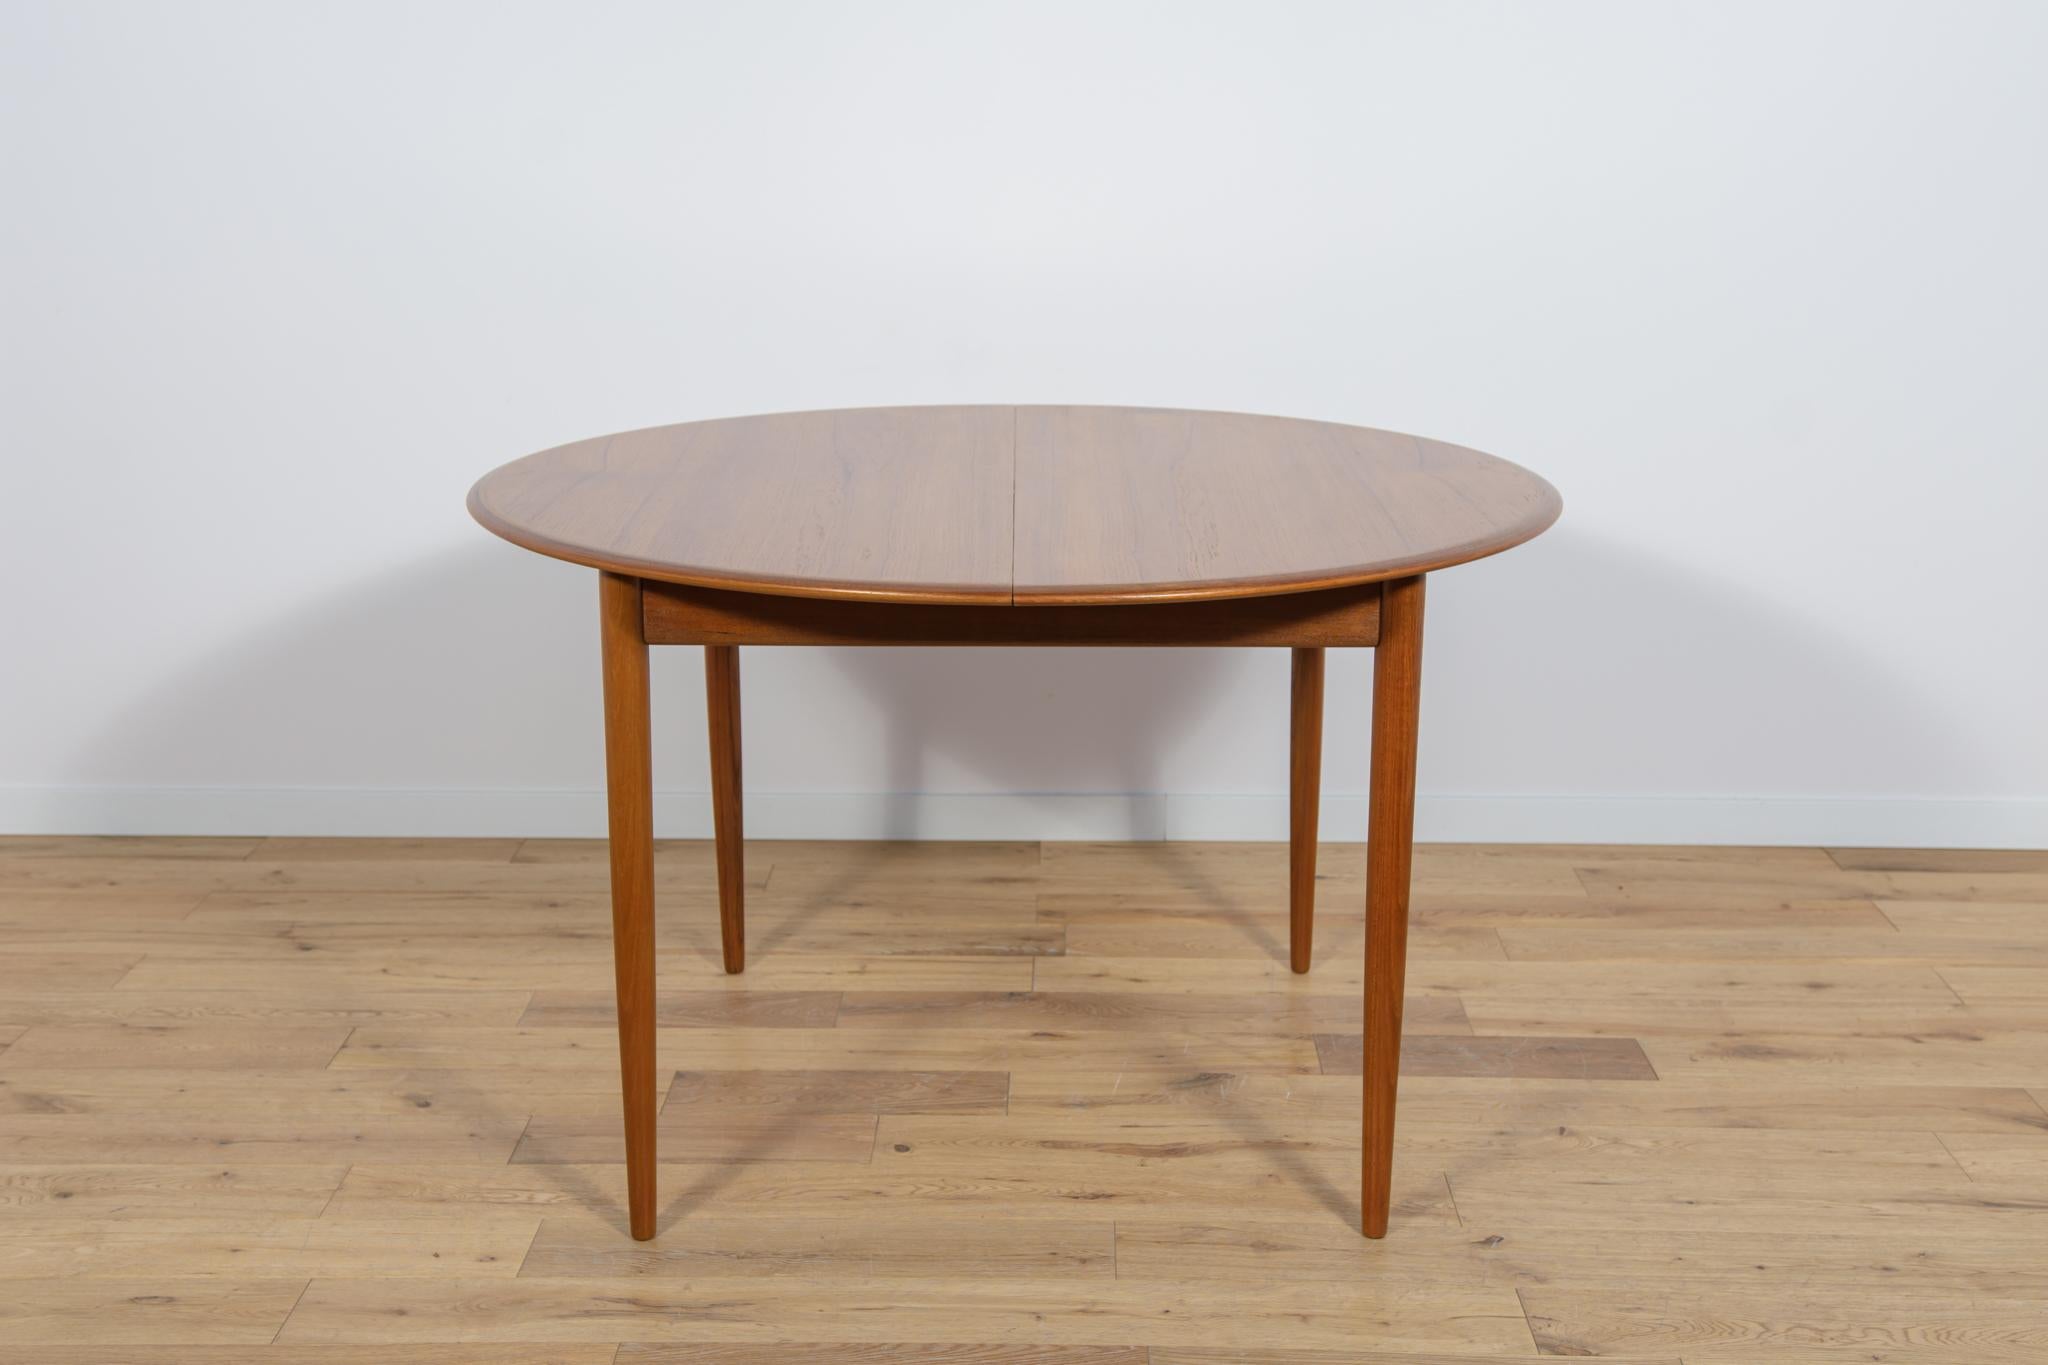 The round extendable table made of teak wood was produced in Denmark in the 1960s. The table has solid, profiled edges giving it an elegant, sublime shape. The table has been completely renovated, cleaned of old coatings, and finished with